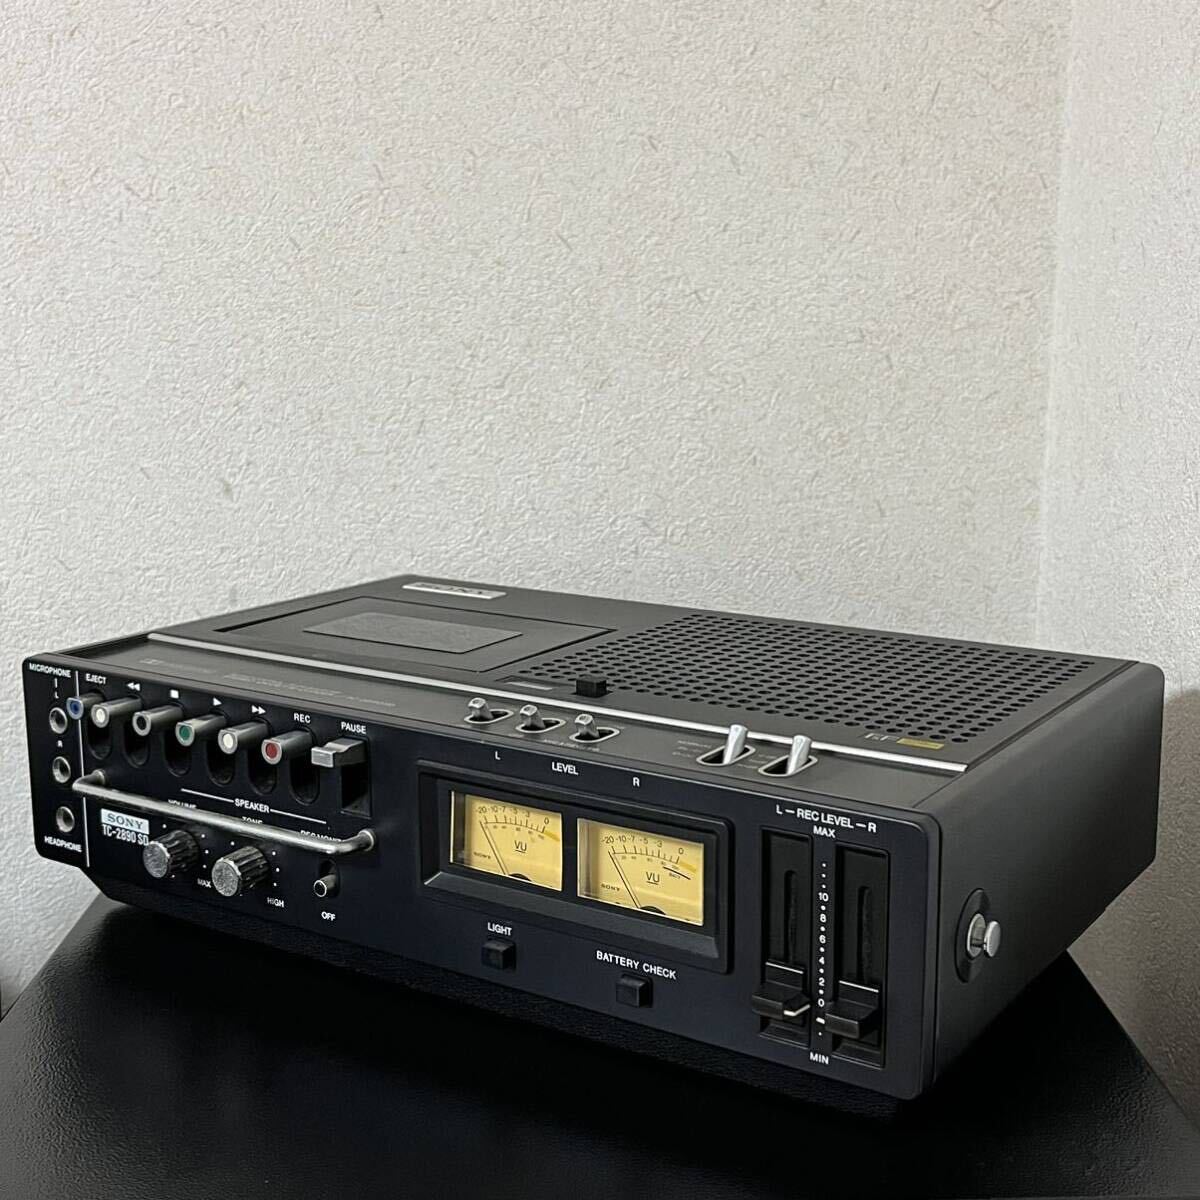 SONY STEREO CASSETE-CORDER TC-2890 SD DOLBY SYSTEM SERVO CONTROL / AUTO SHUT OFF ソニー カセットデンスケ ステレオテープレコーダー_画像2